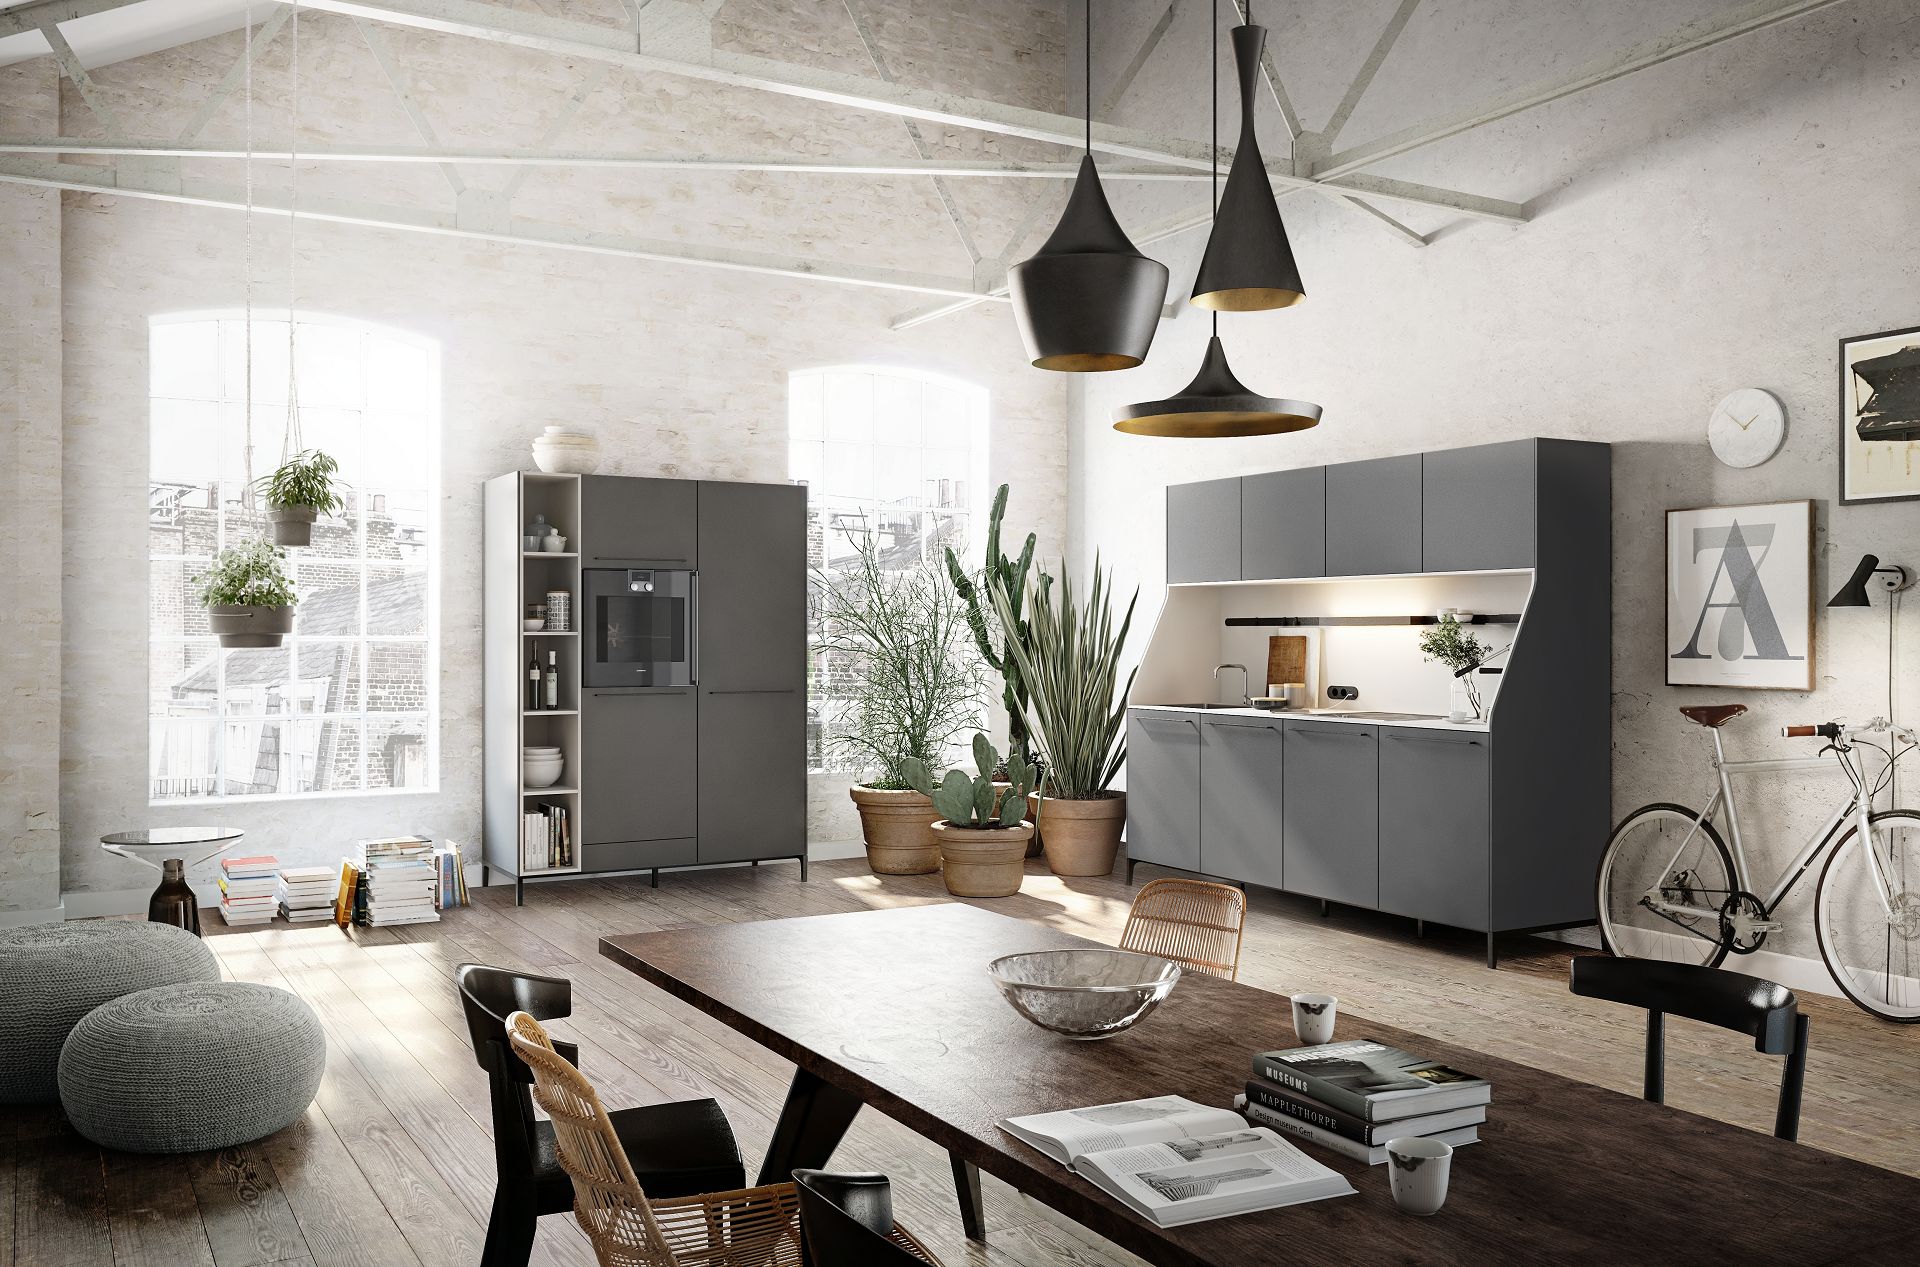 SieMatic 29 kitchen sideboard and freestanding tall cabinet in graphite grey from the Urban style collection